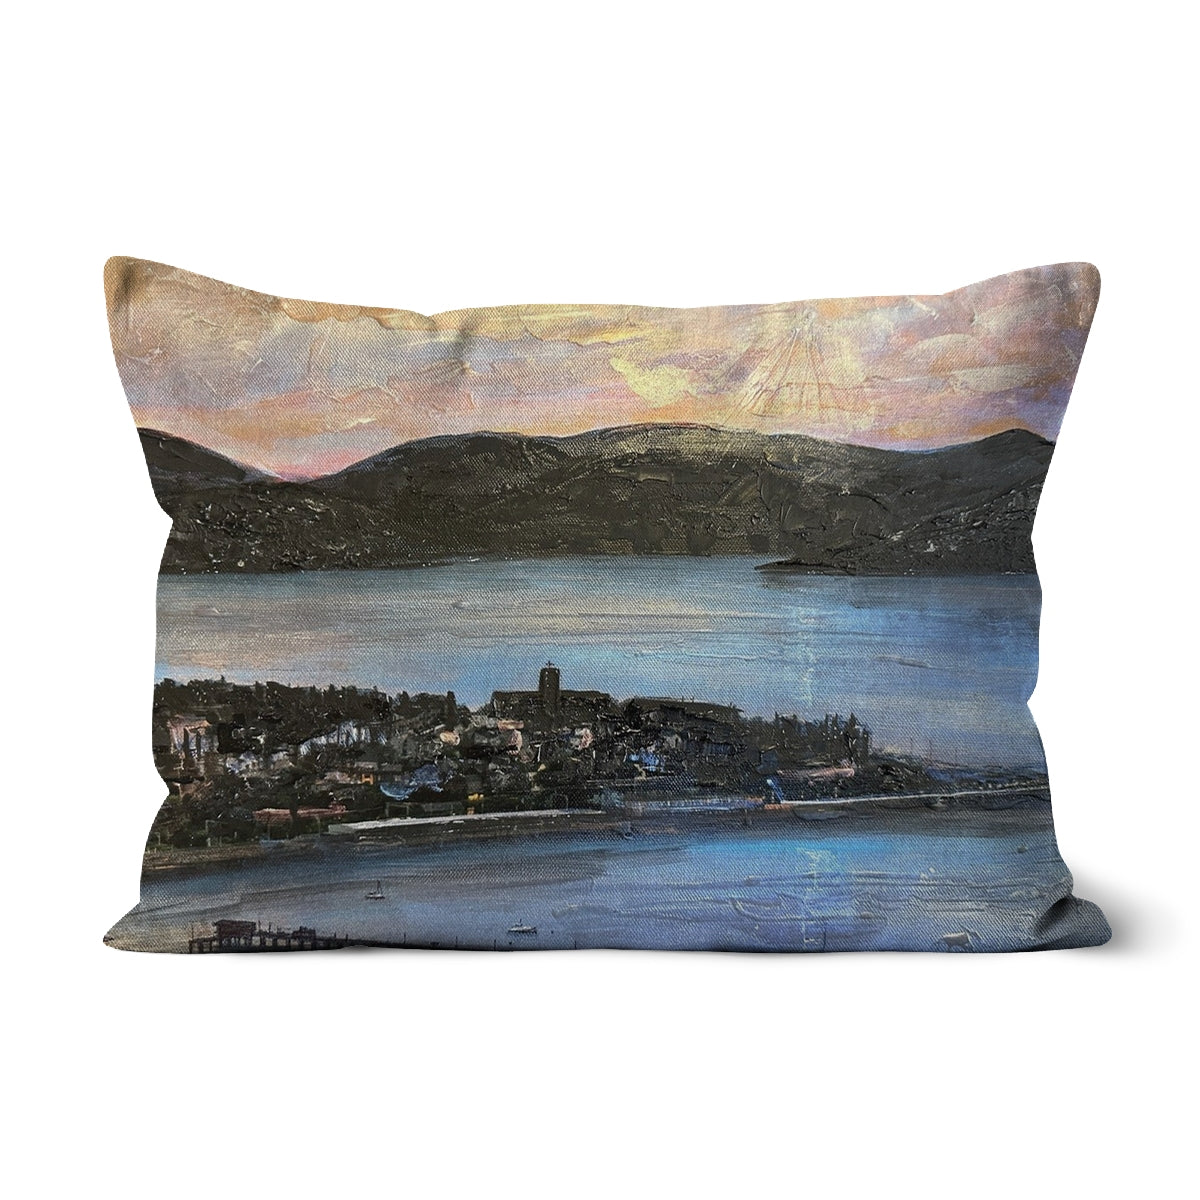 From Lyle Hill Art Gifts Cushion